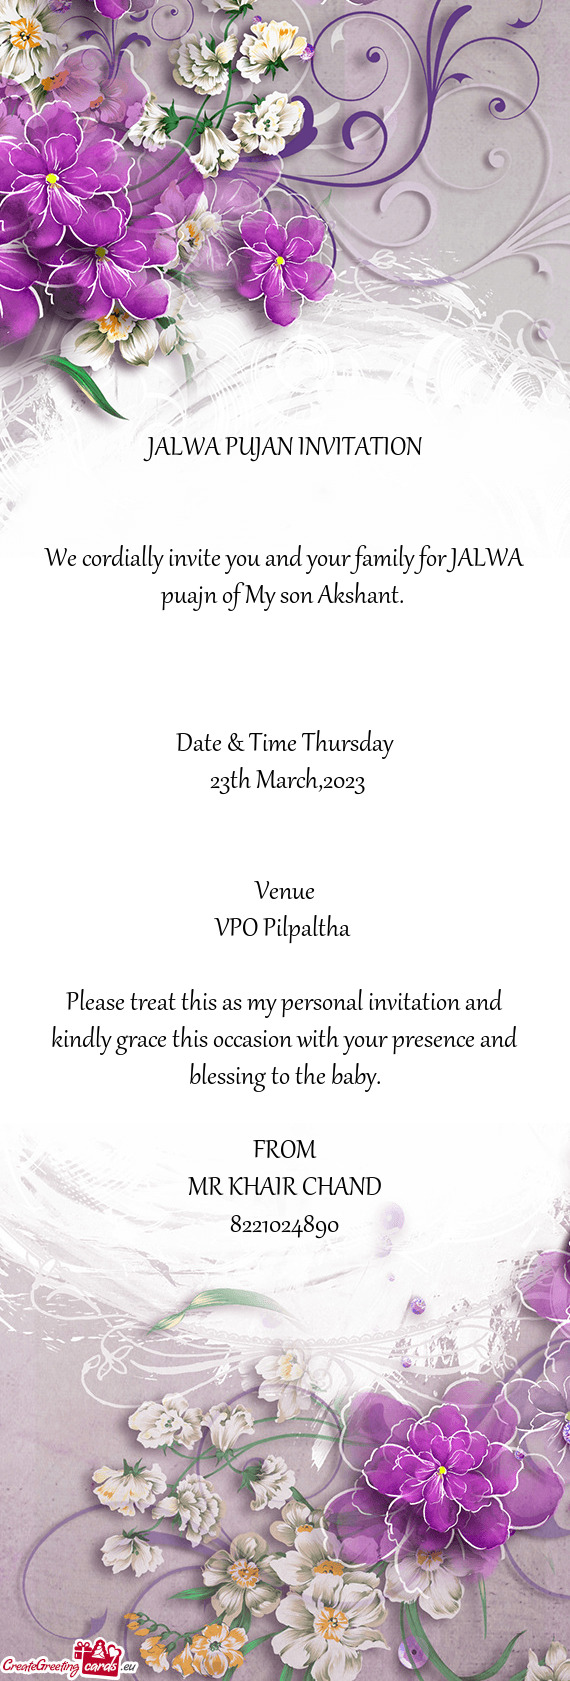 We cordially invite you and your family for JALWA puajn of My son Akshant